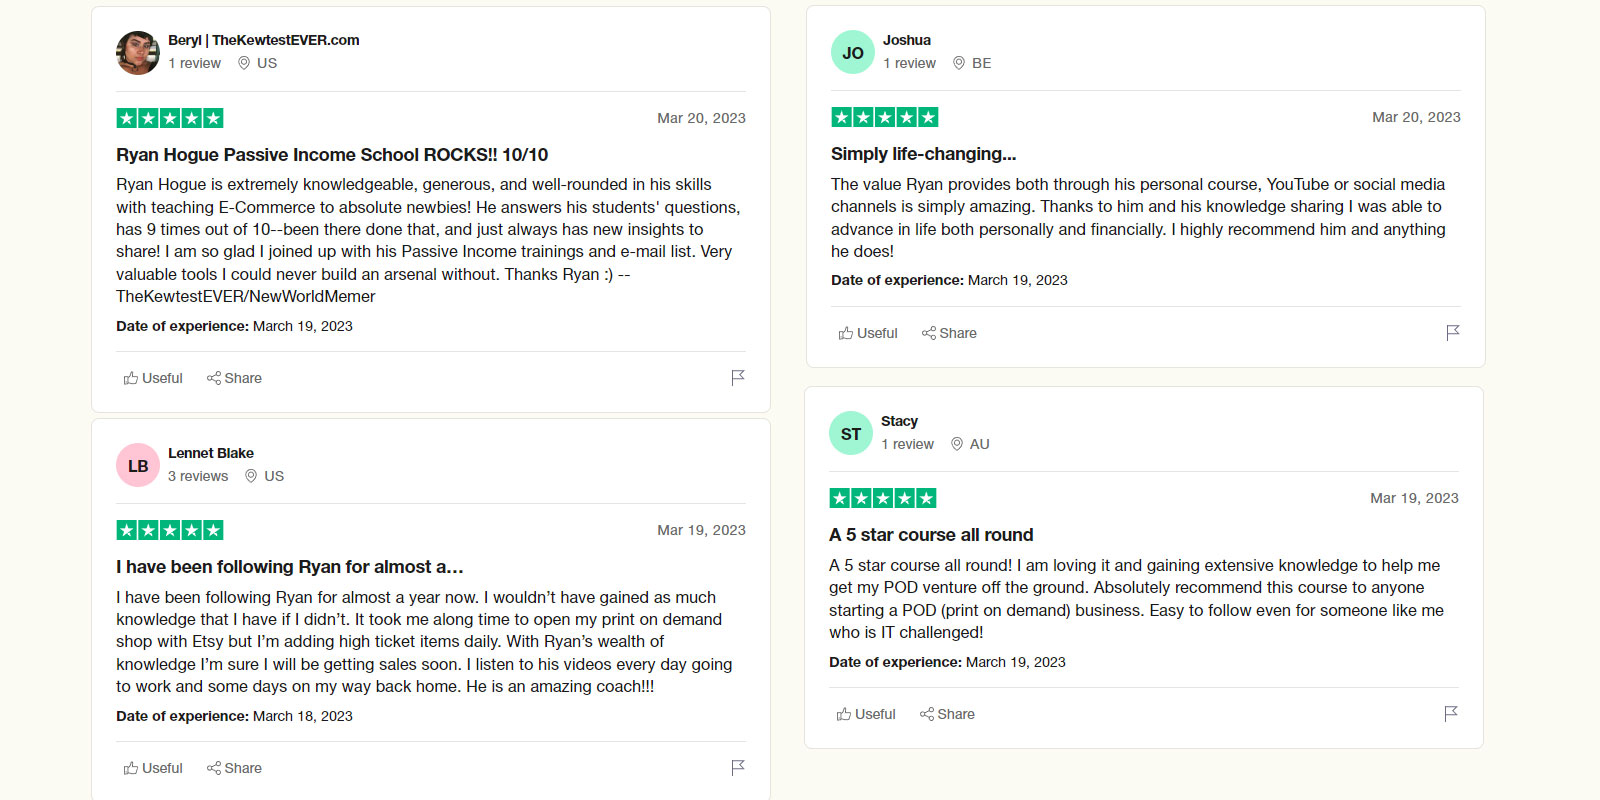 Reviews of Ryan Hogue's Course